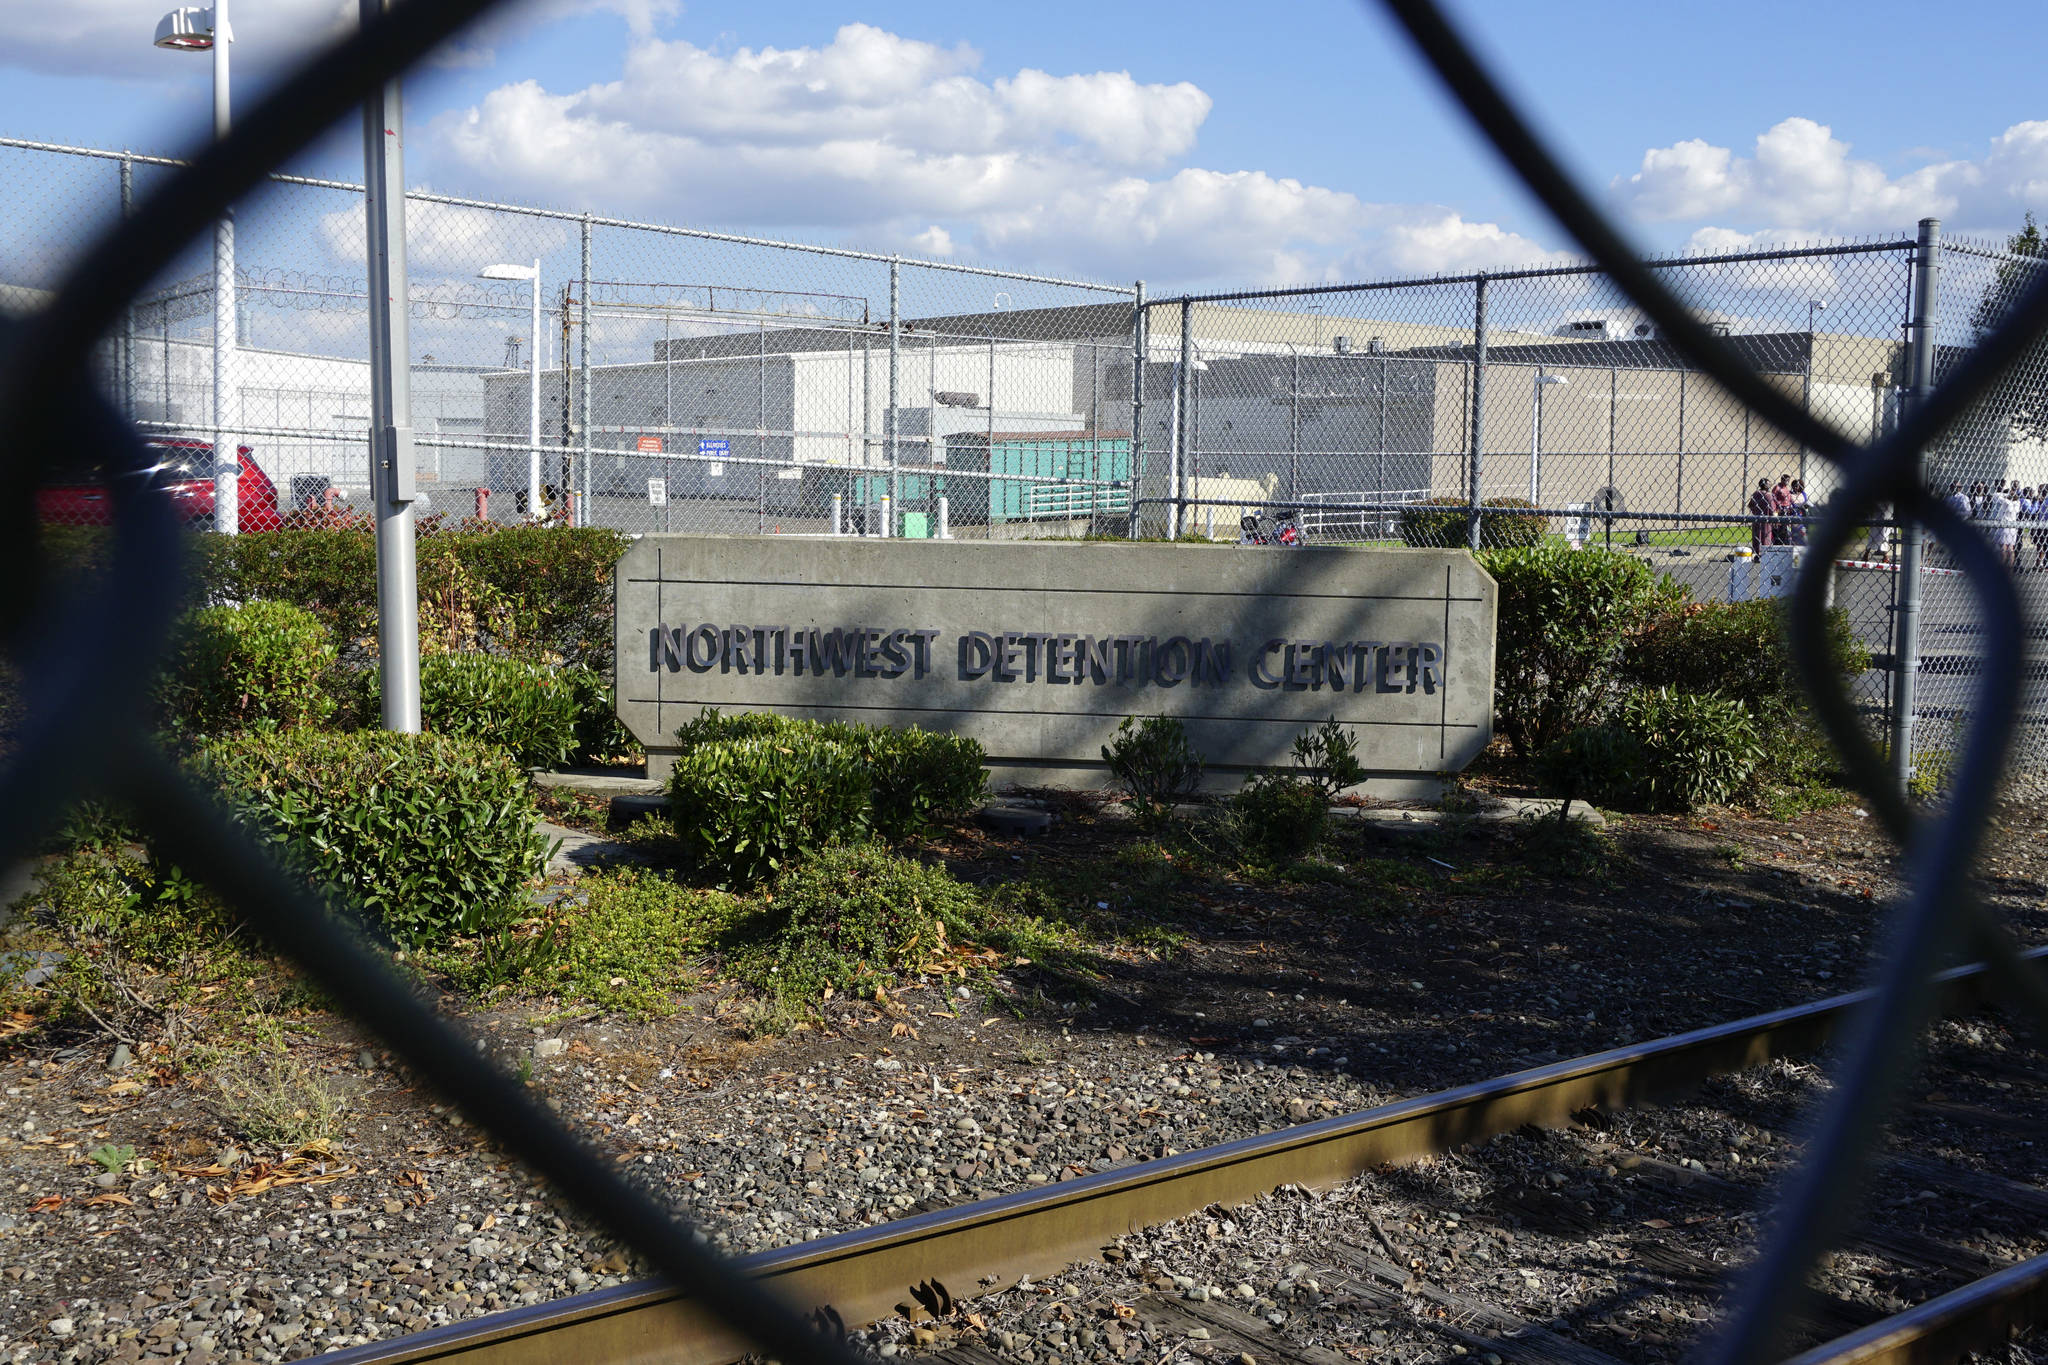 Tacoma’s Northwest Detention Center is run by Florida-based GEO Group. Photo by Melissa Hellmann